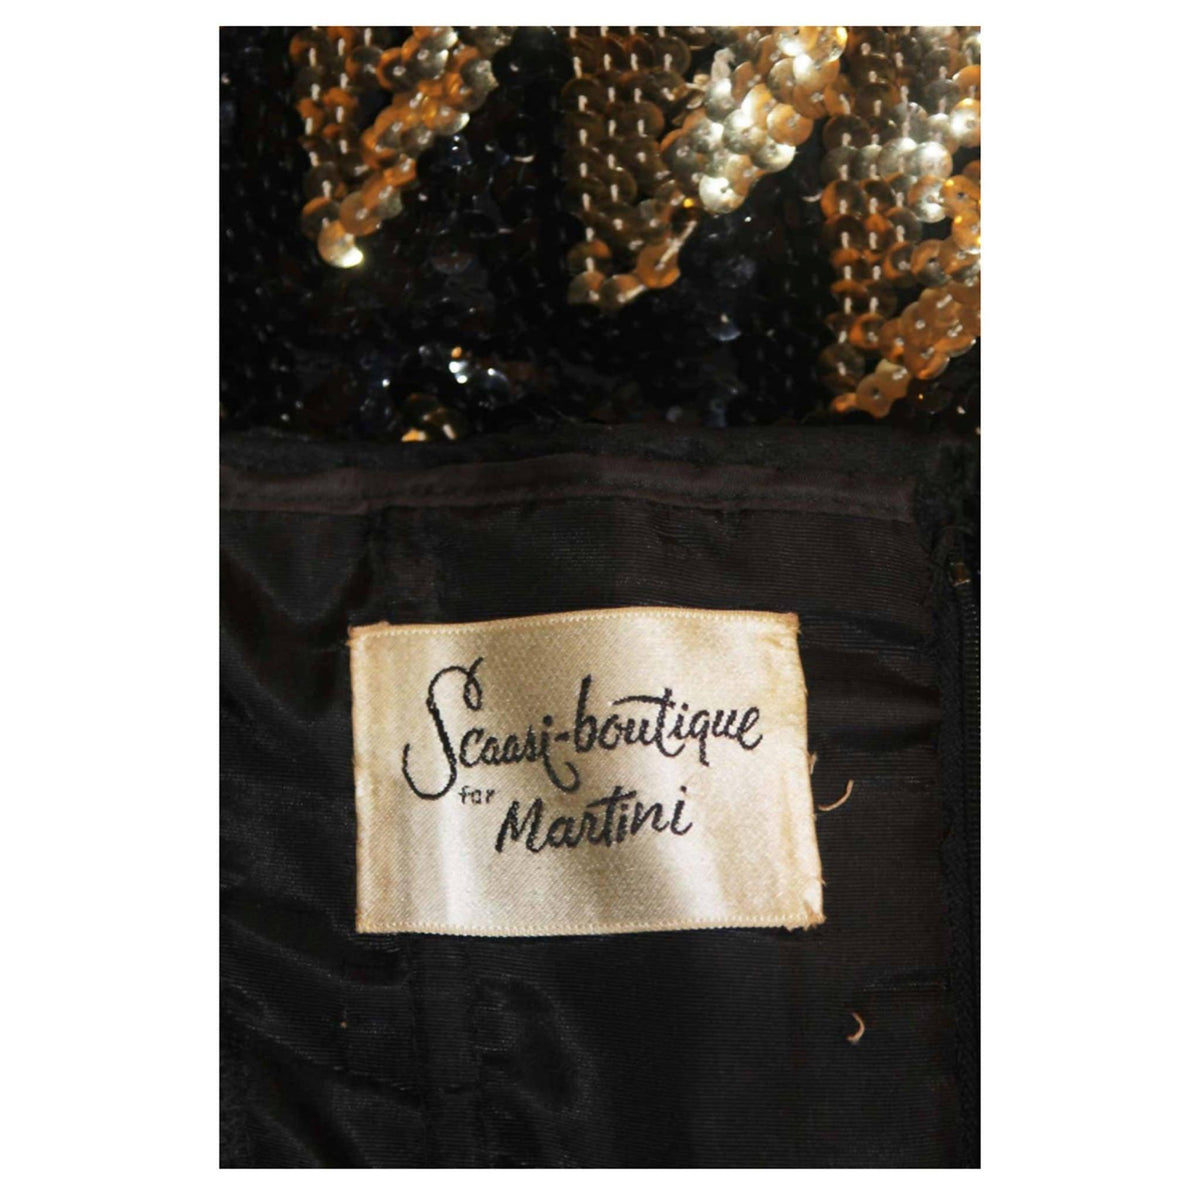 Pre-Owned ARNOLD SCAASI Strapless Black and Gold Knit Sequin Gown | Size US 2-4 - theREMODA